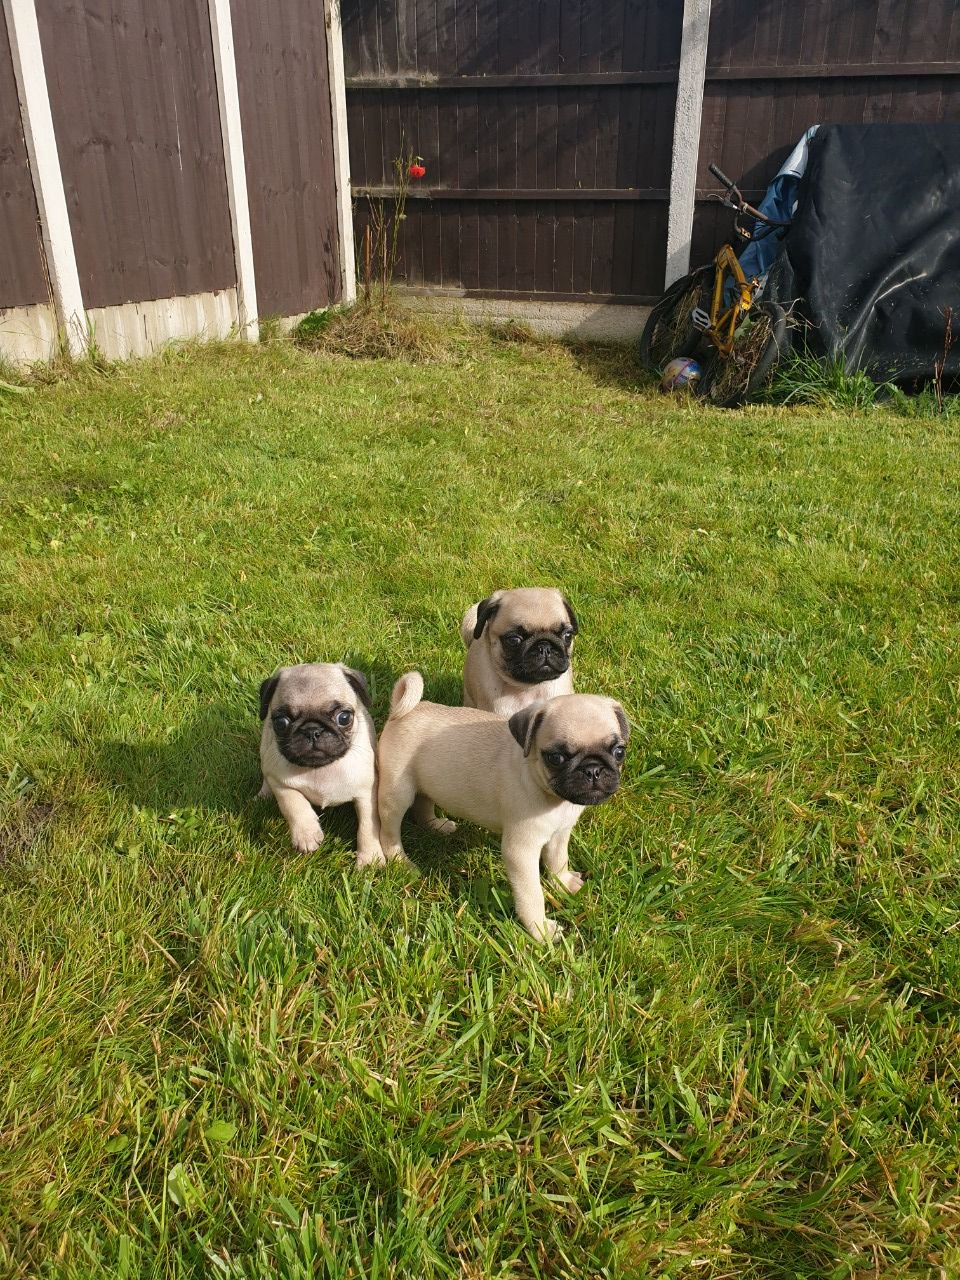 Pug puppies for sale